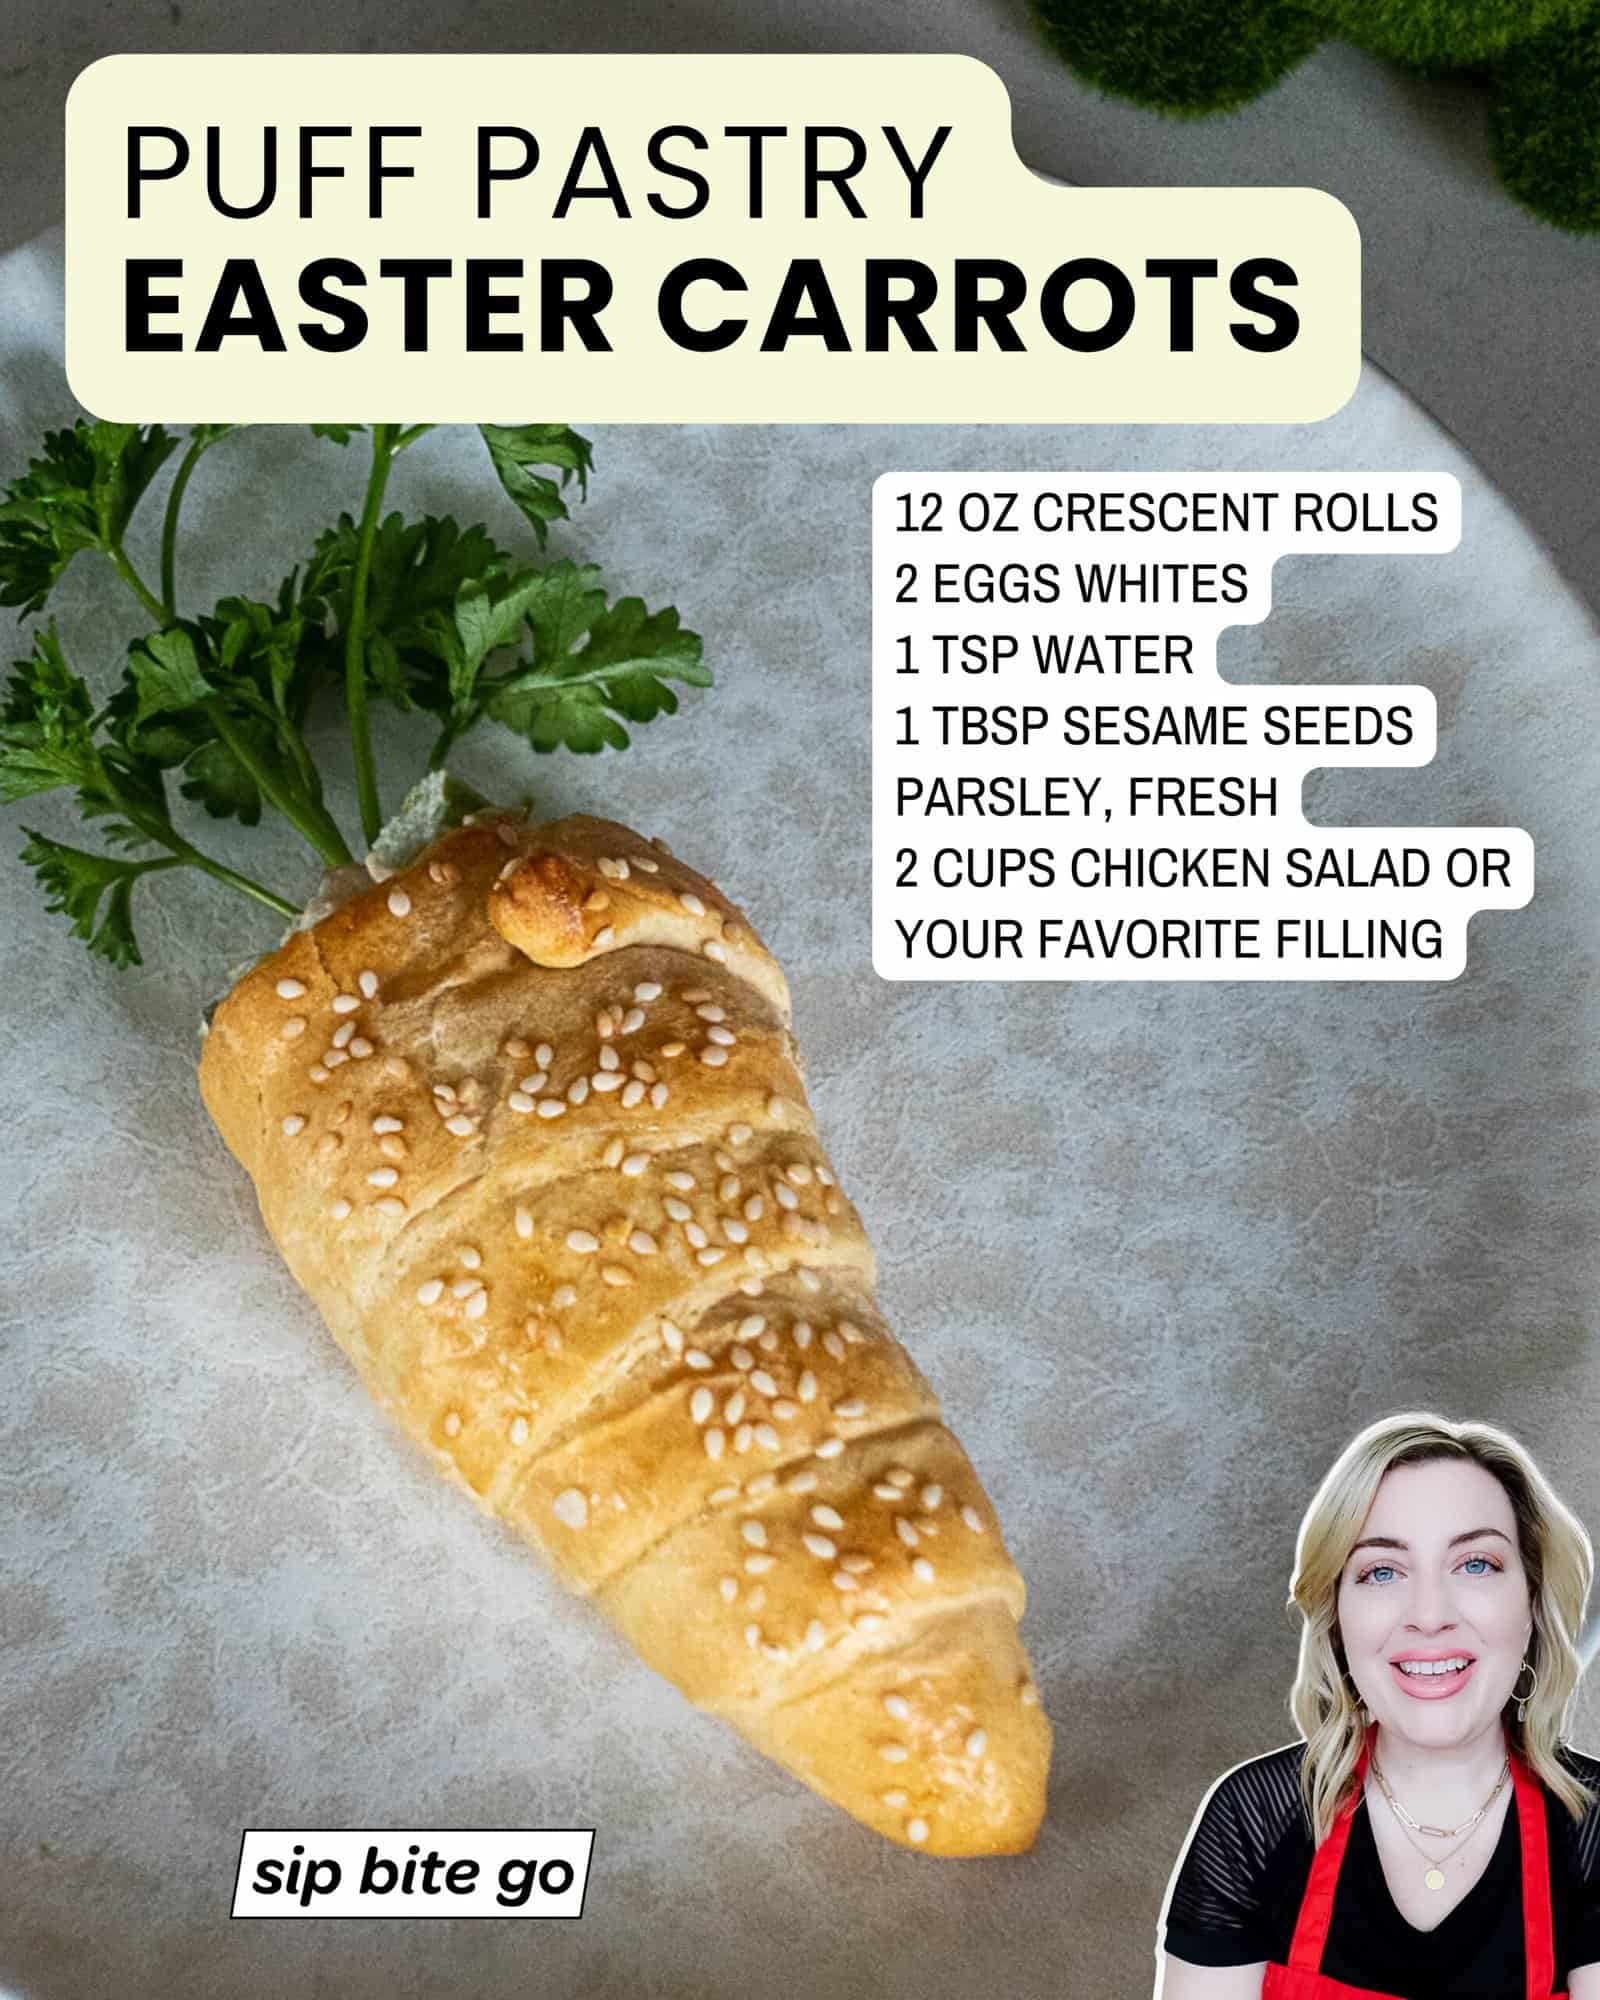 Ingredients for Stuffed Easter Puff Pastry Carrots